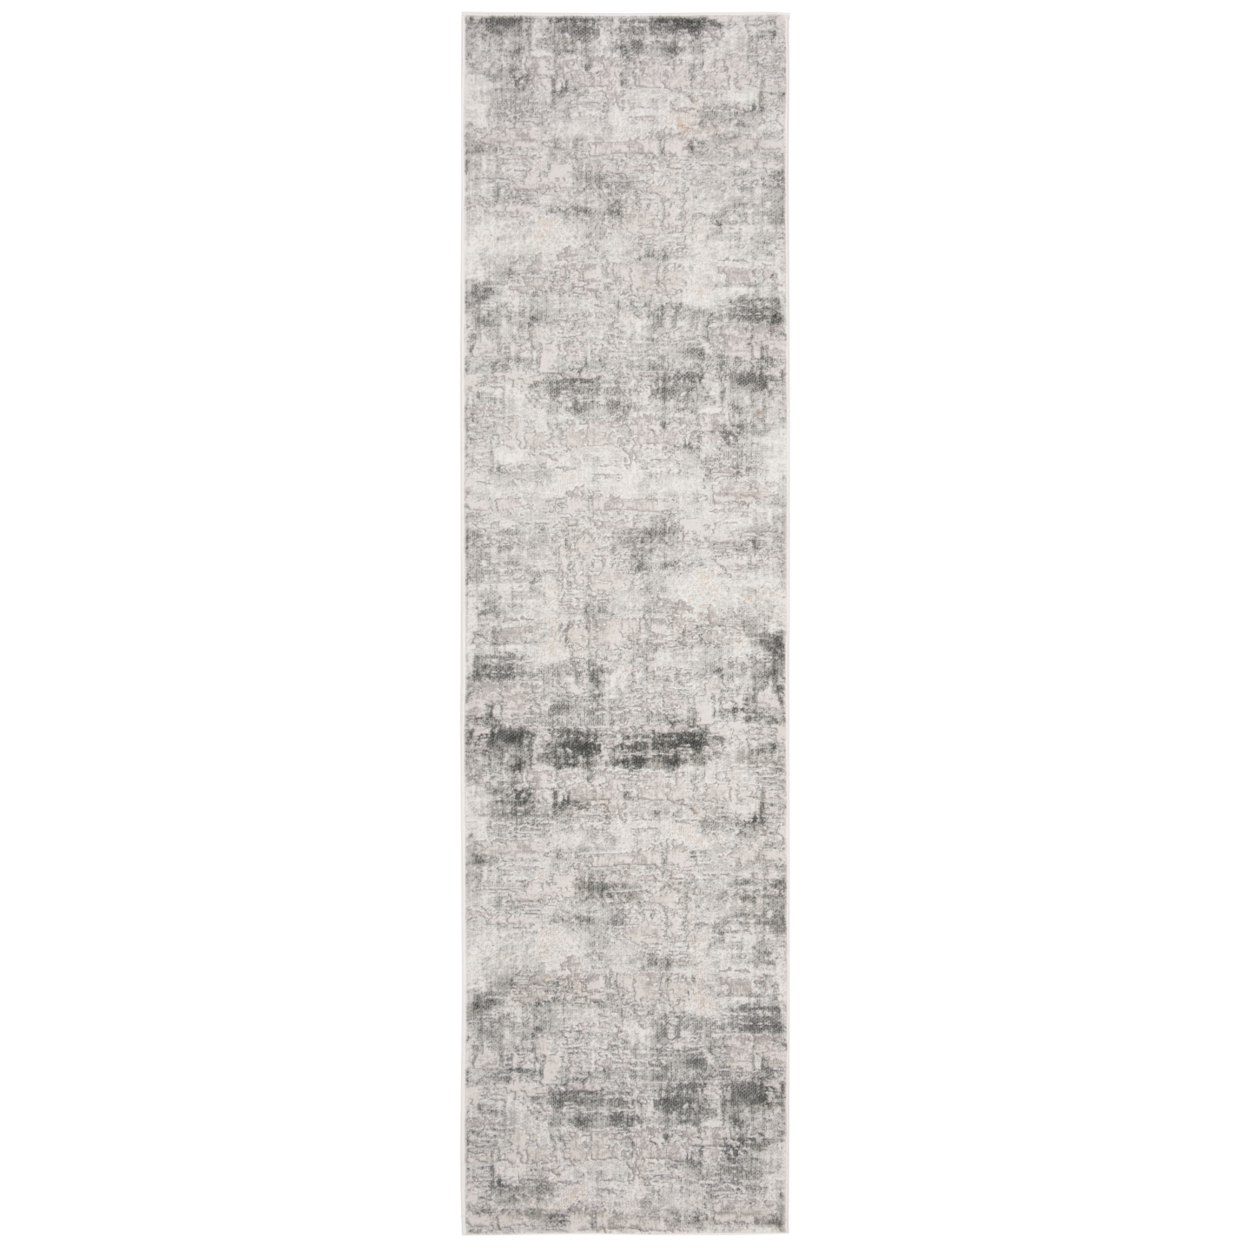 SAFAVIEH Vogue Collection VGE143A Beige / Charcoal Rug - 2' X 14'